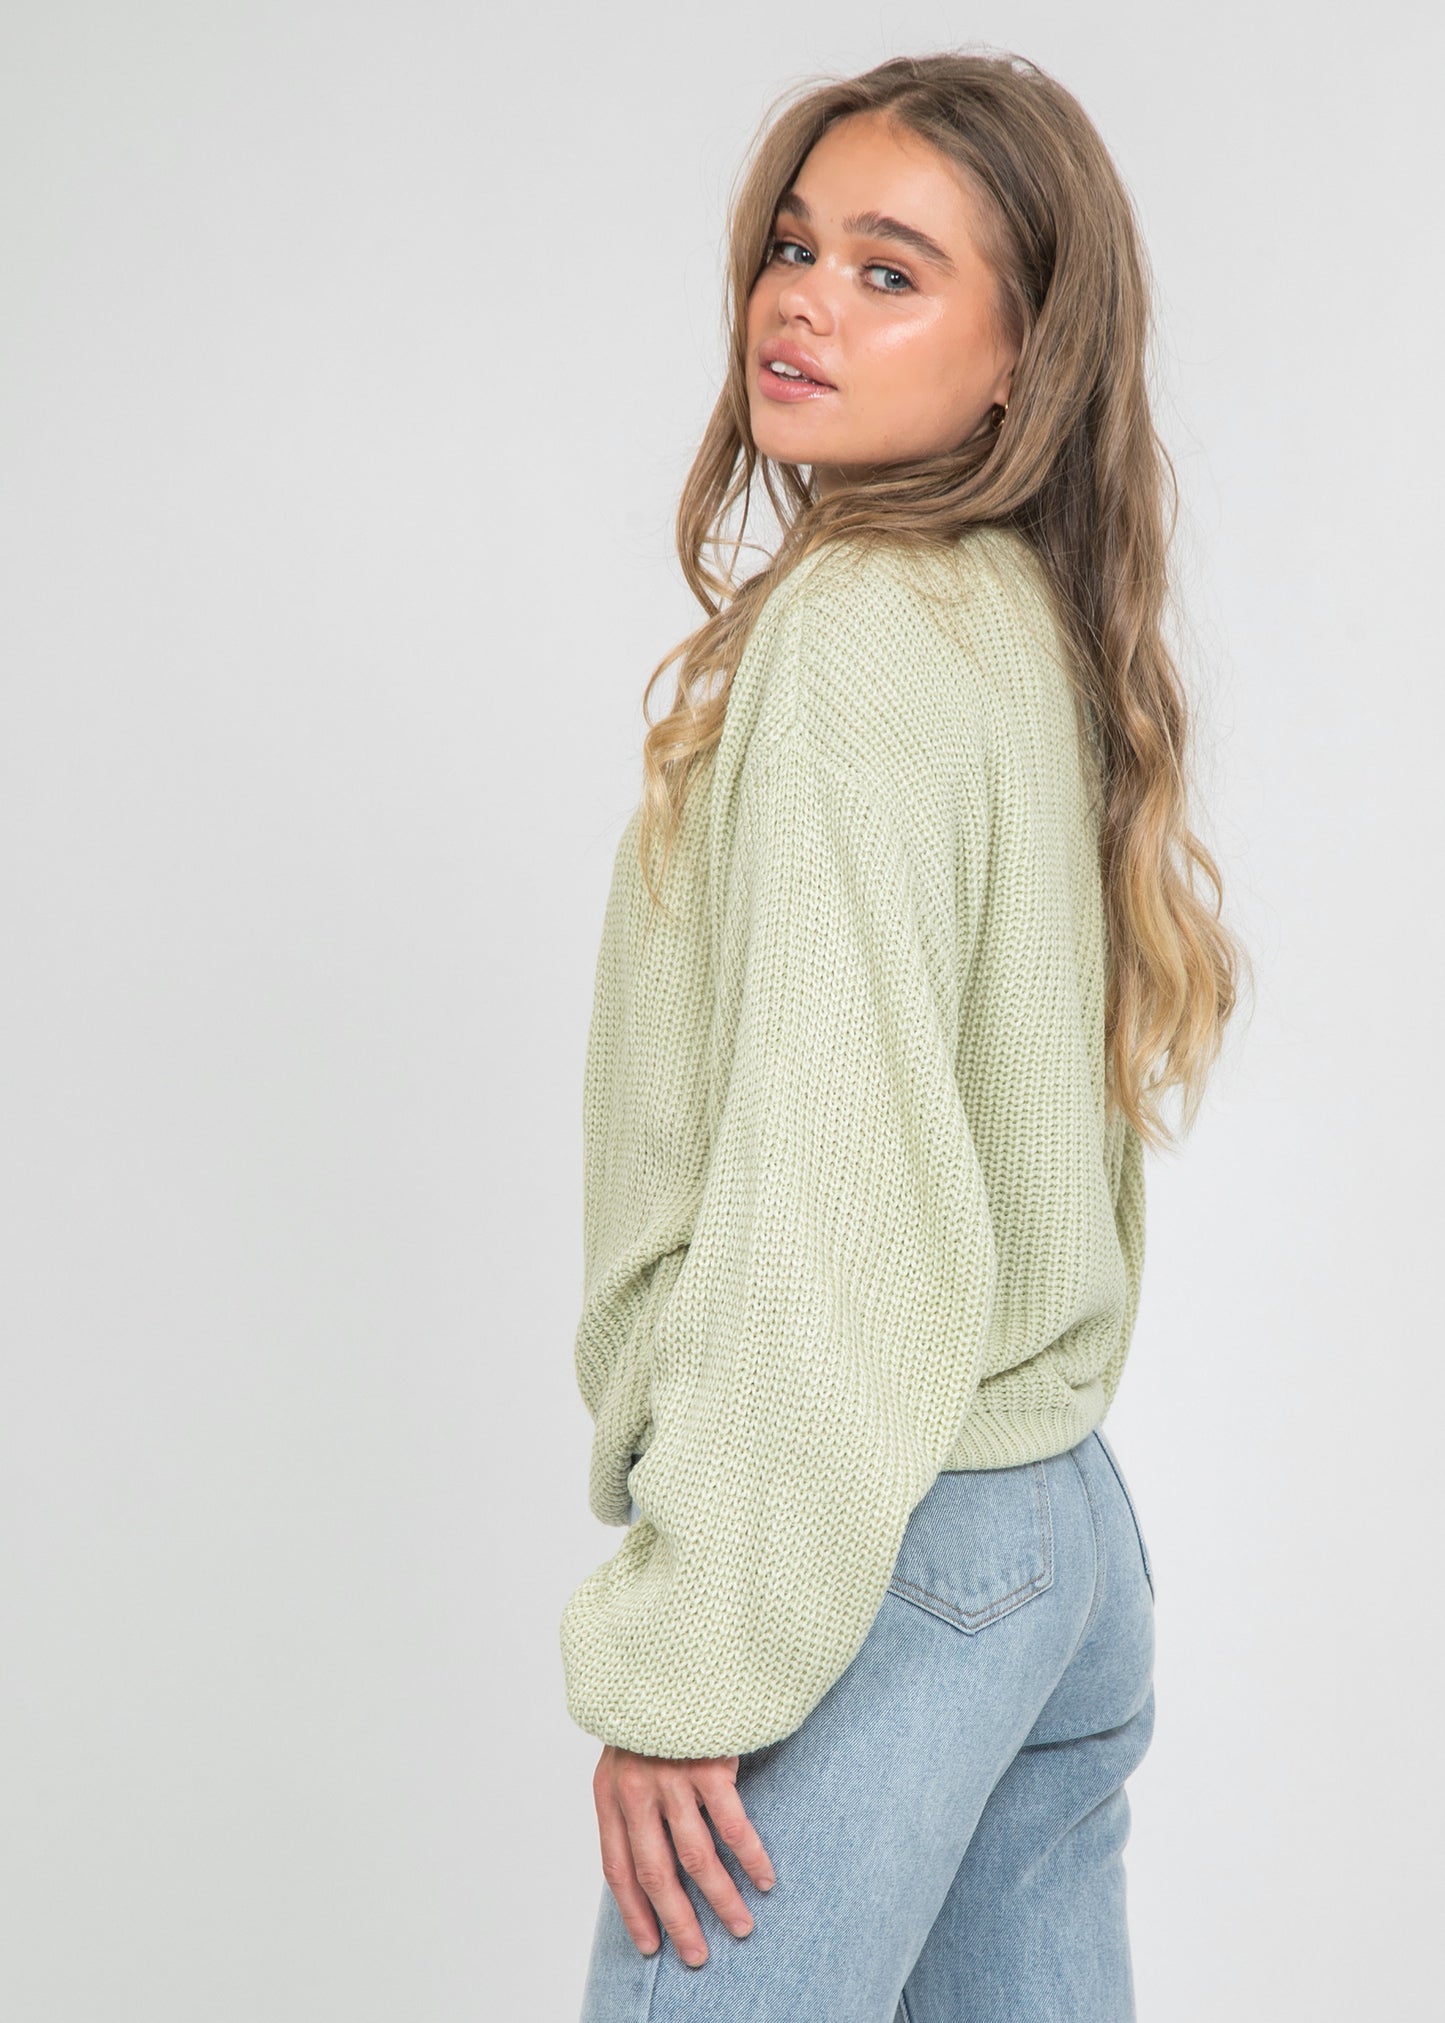 Wrap cardigan with tie front in light green